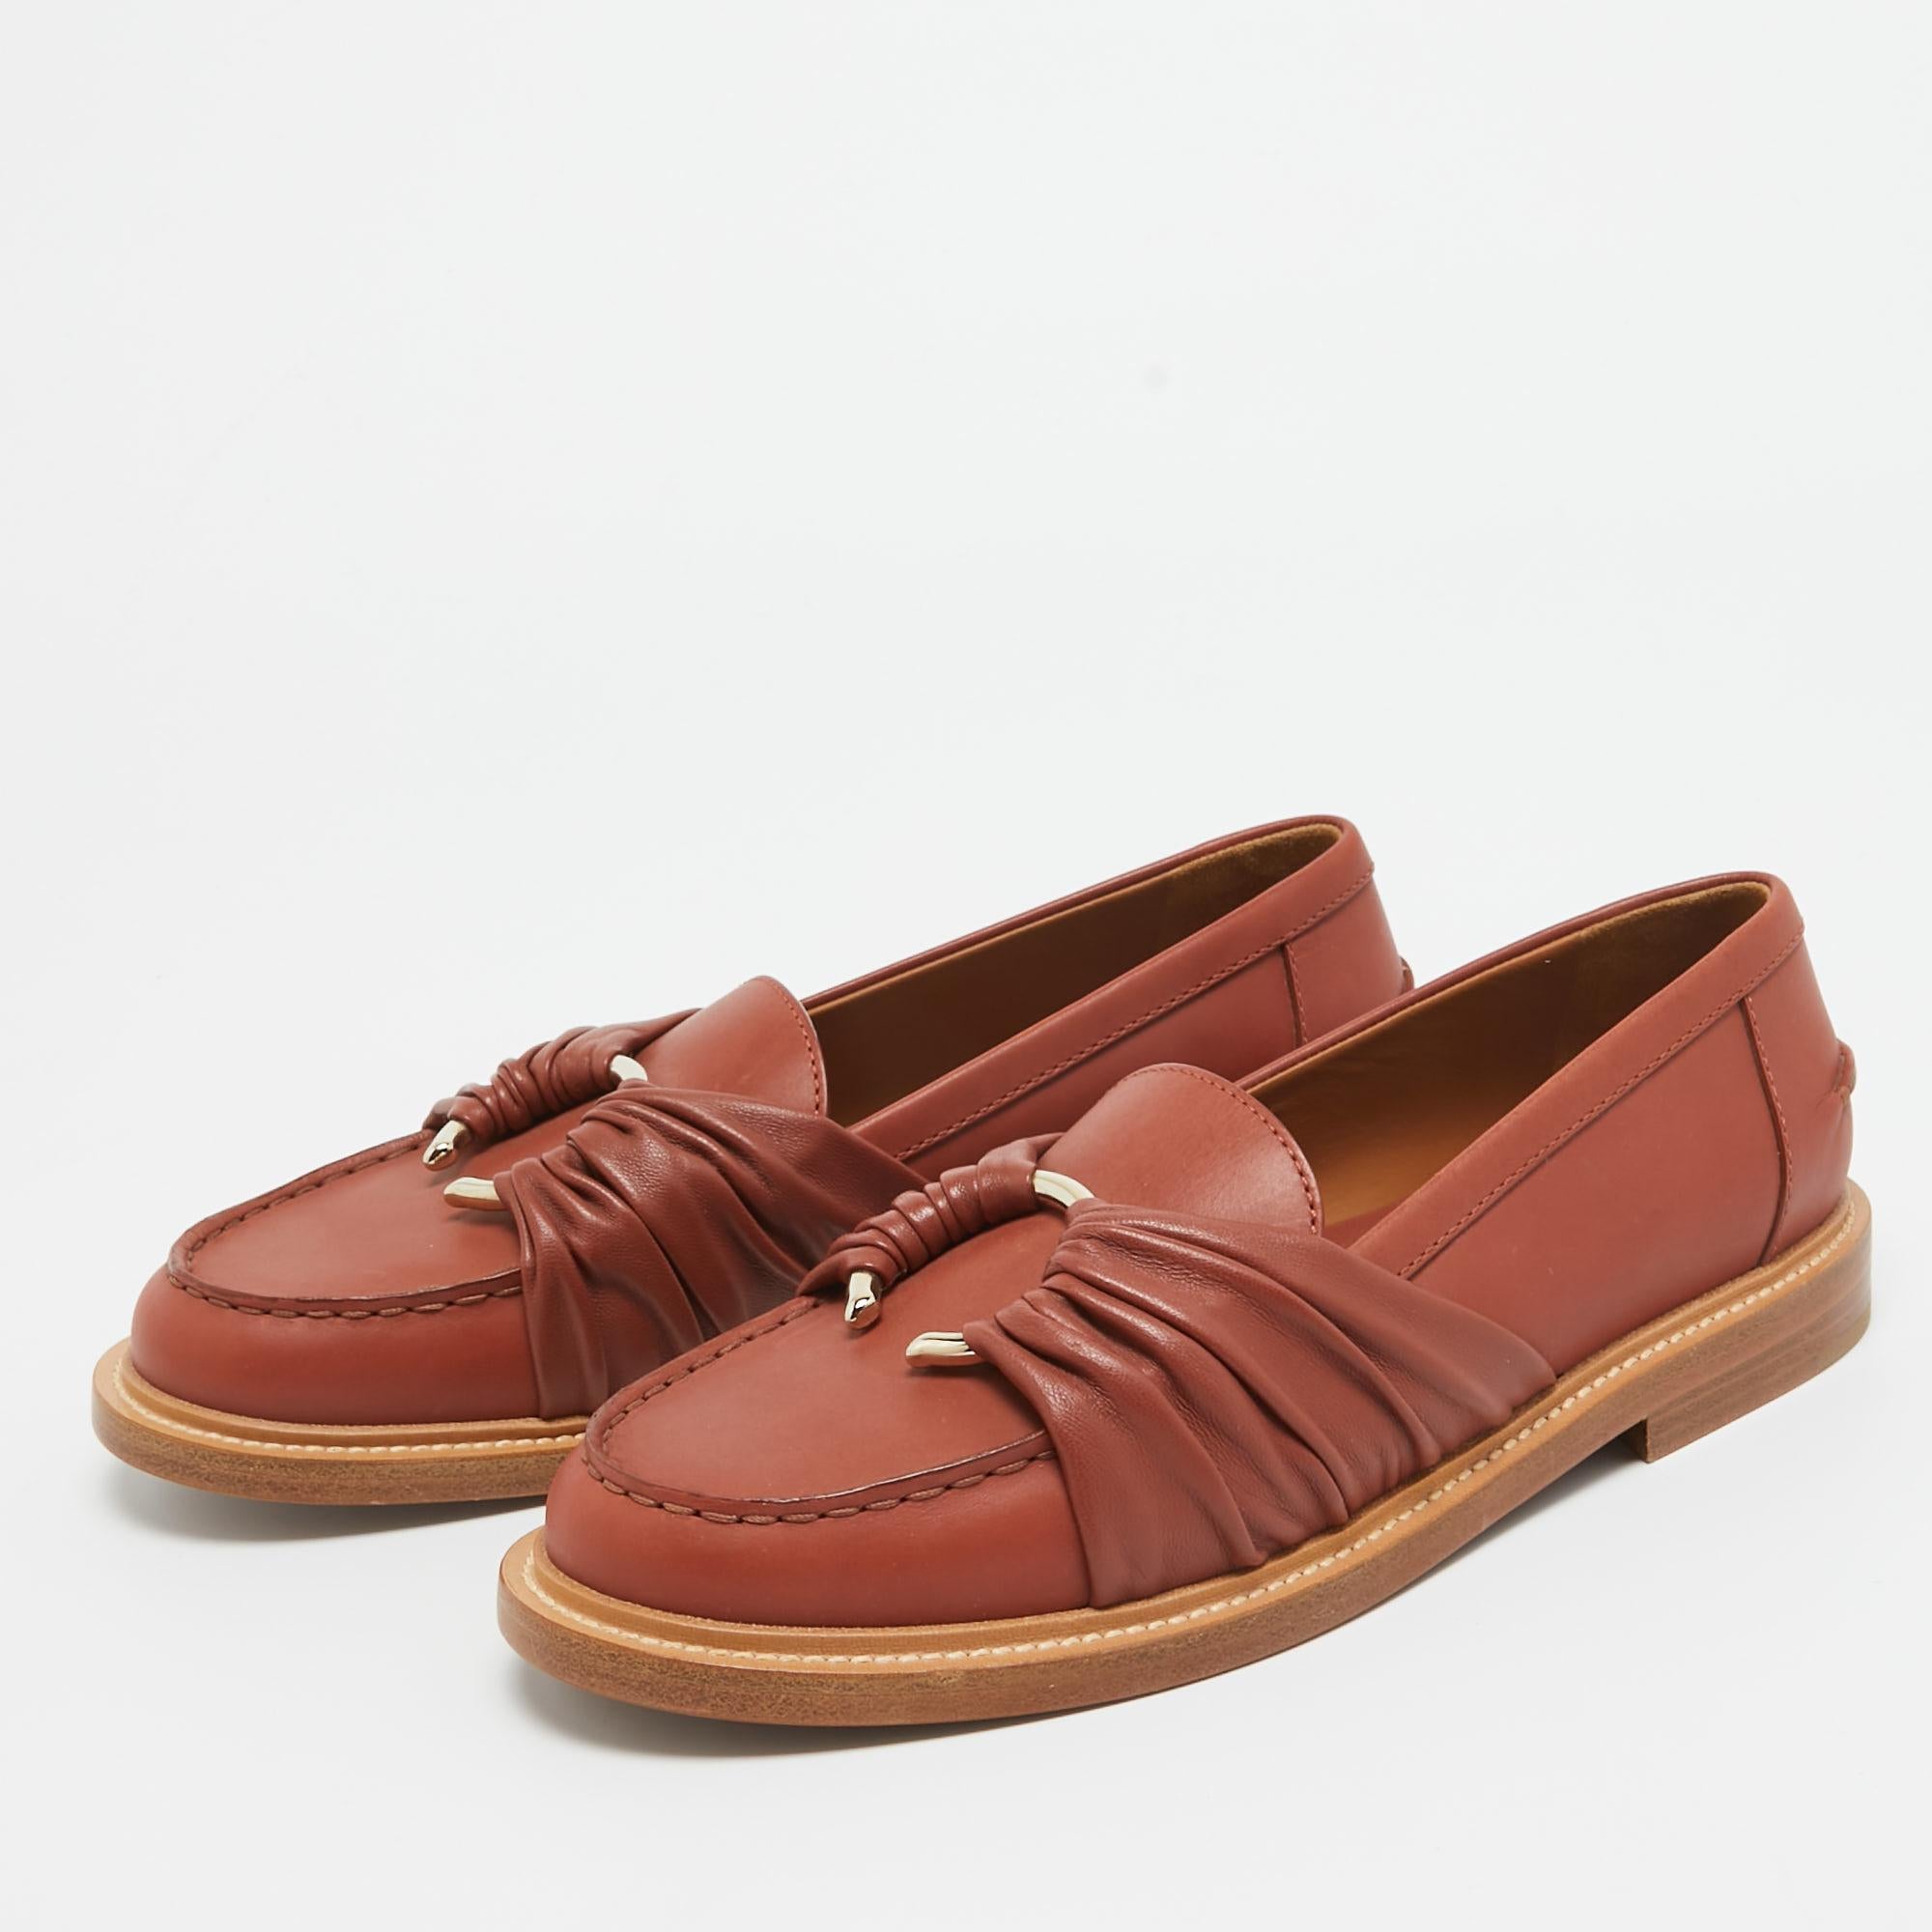 Chloe Brown Leather C Logo Loafers Size 38 2